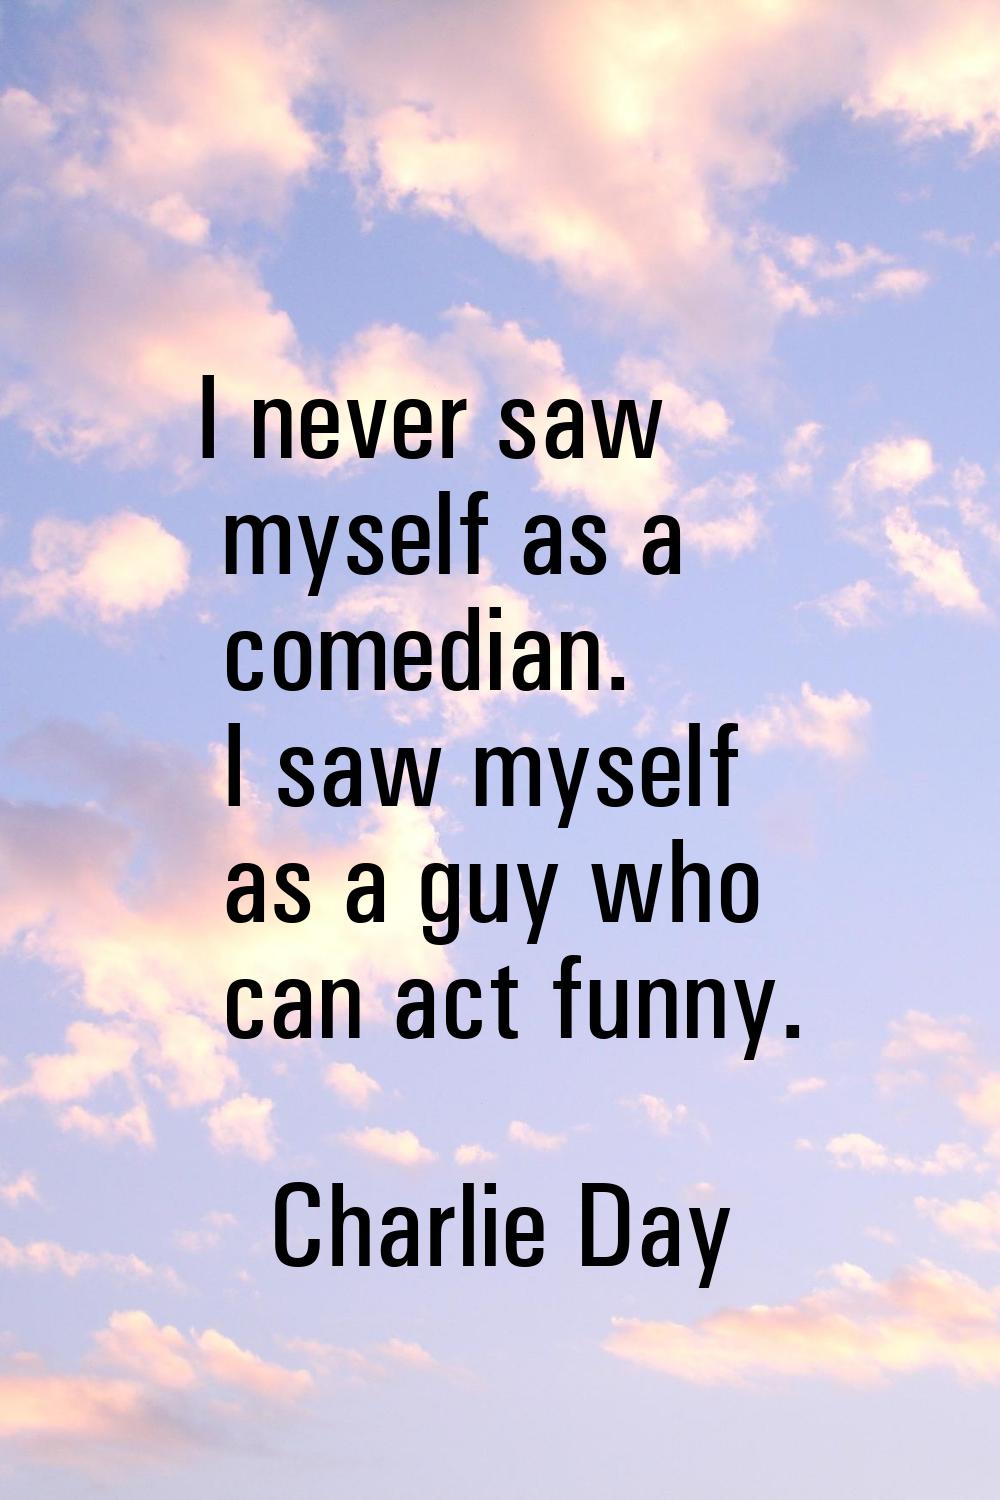 I never saw myself as a comedian. I saw myself as a guy who can act funny.